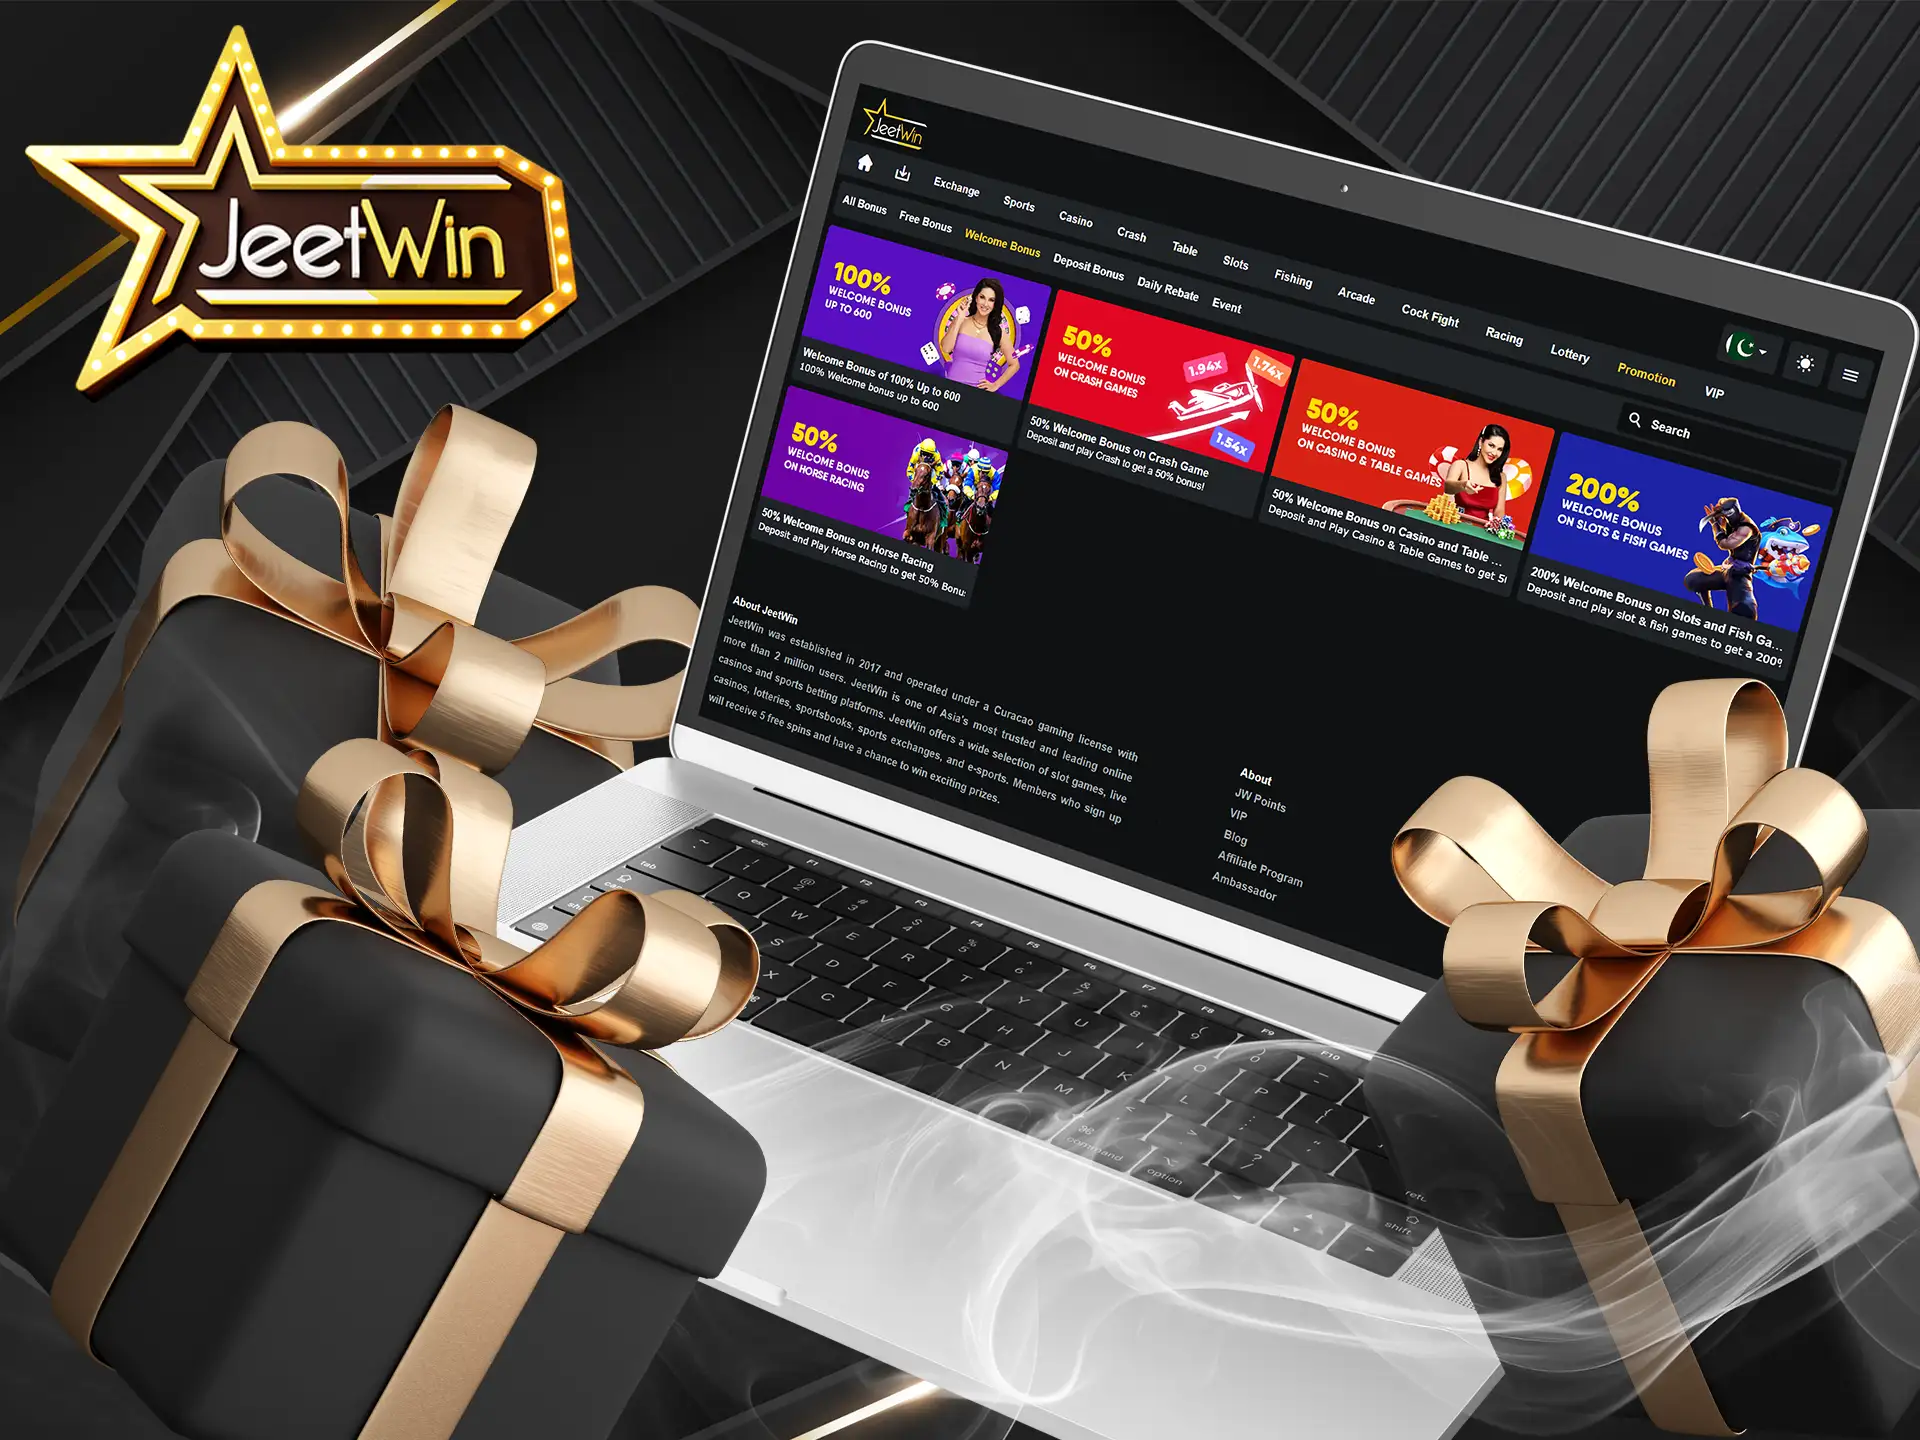 To get JeetWin welcome bonus sign up and deposit into your account.